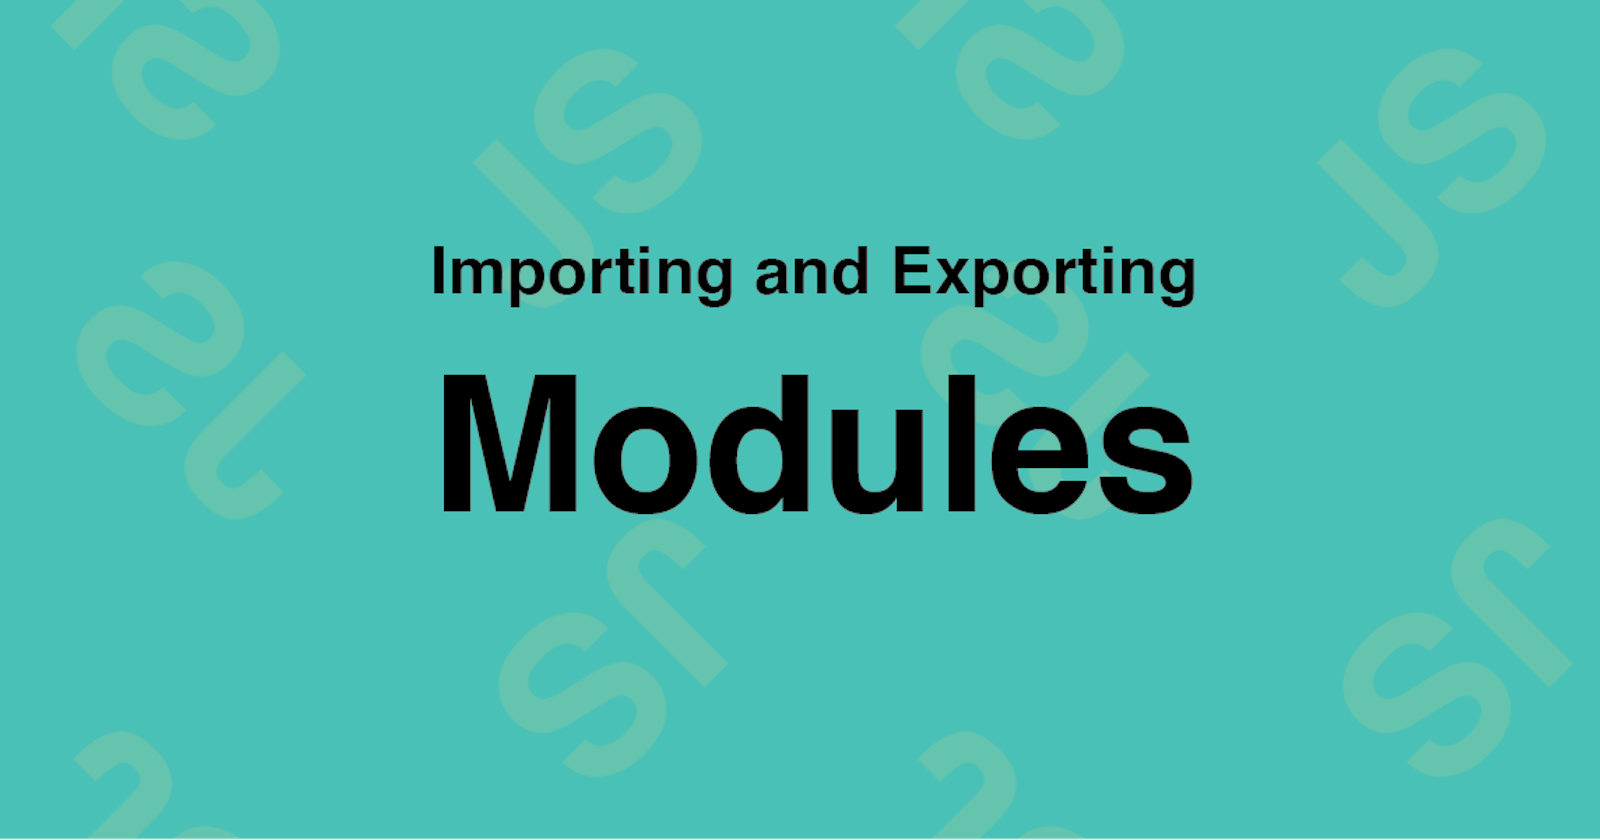 Importing and Exporting Modules in JavaScript